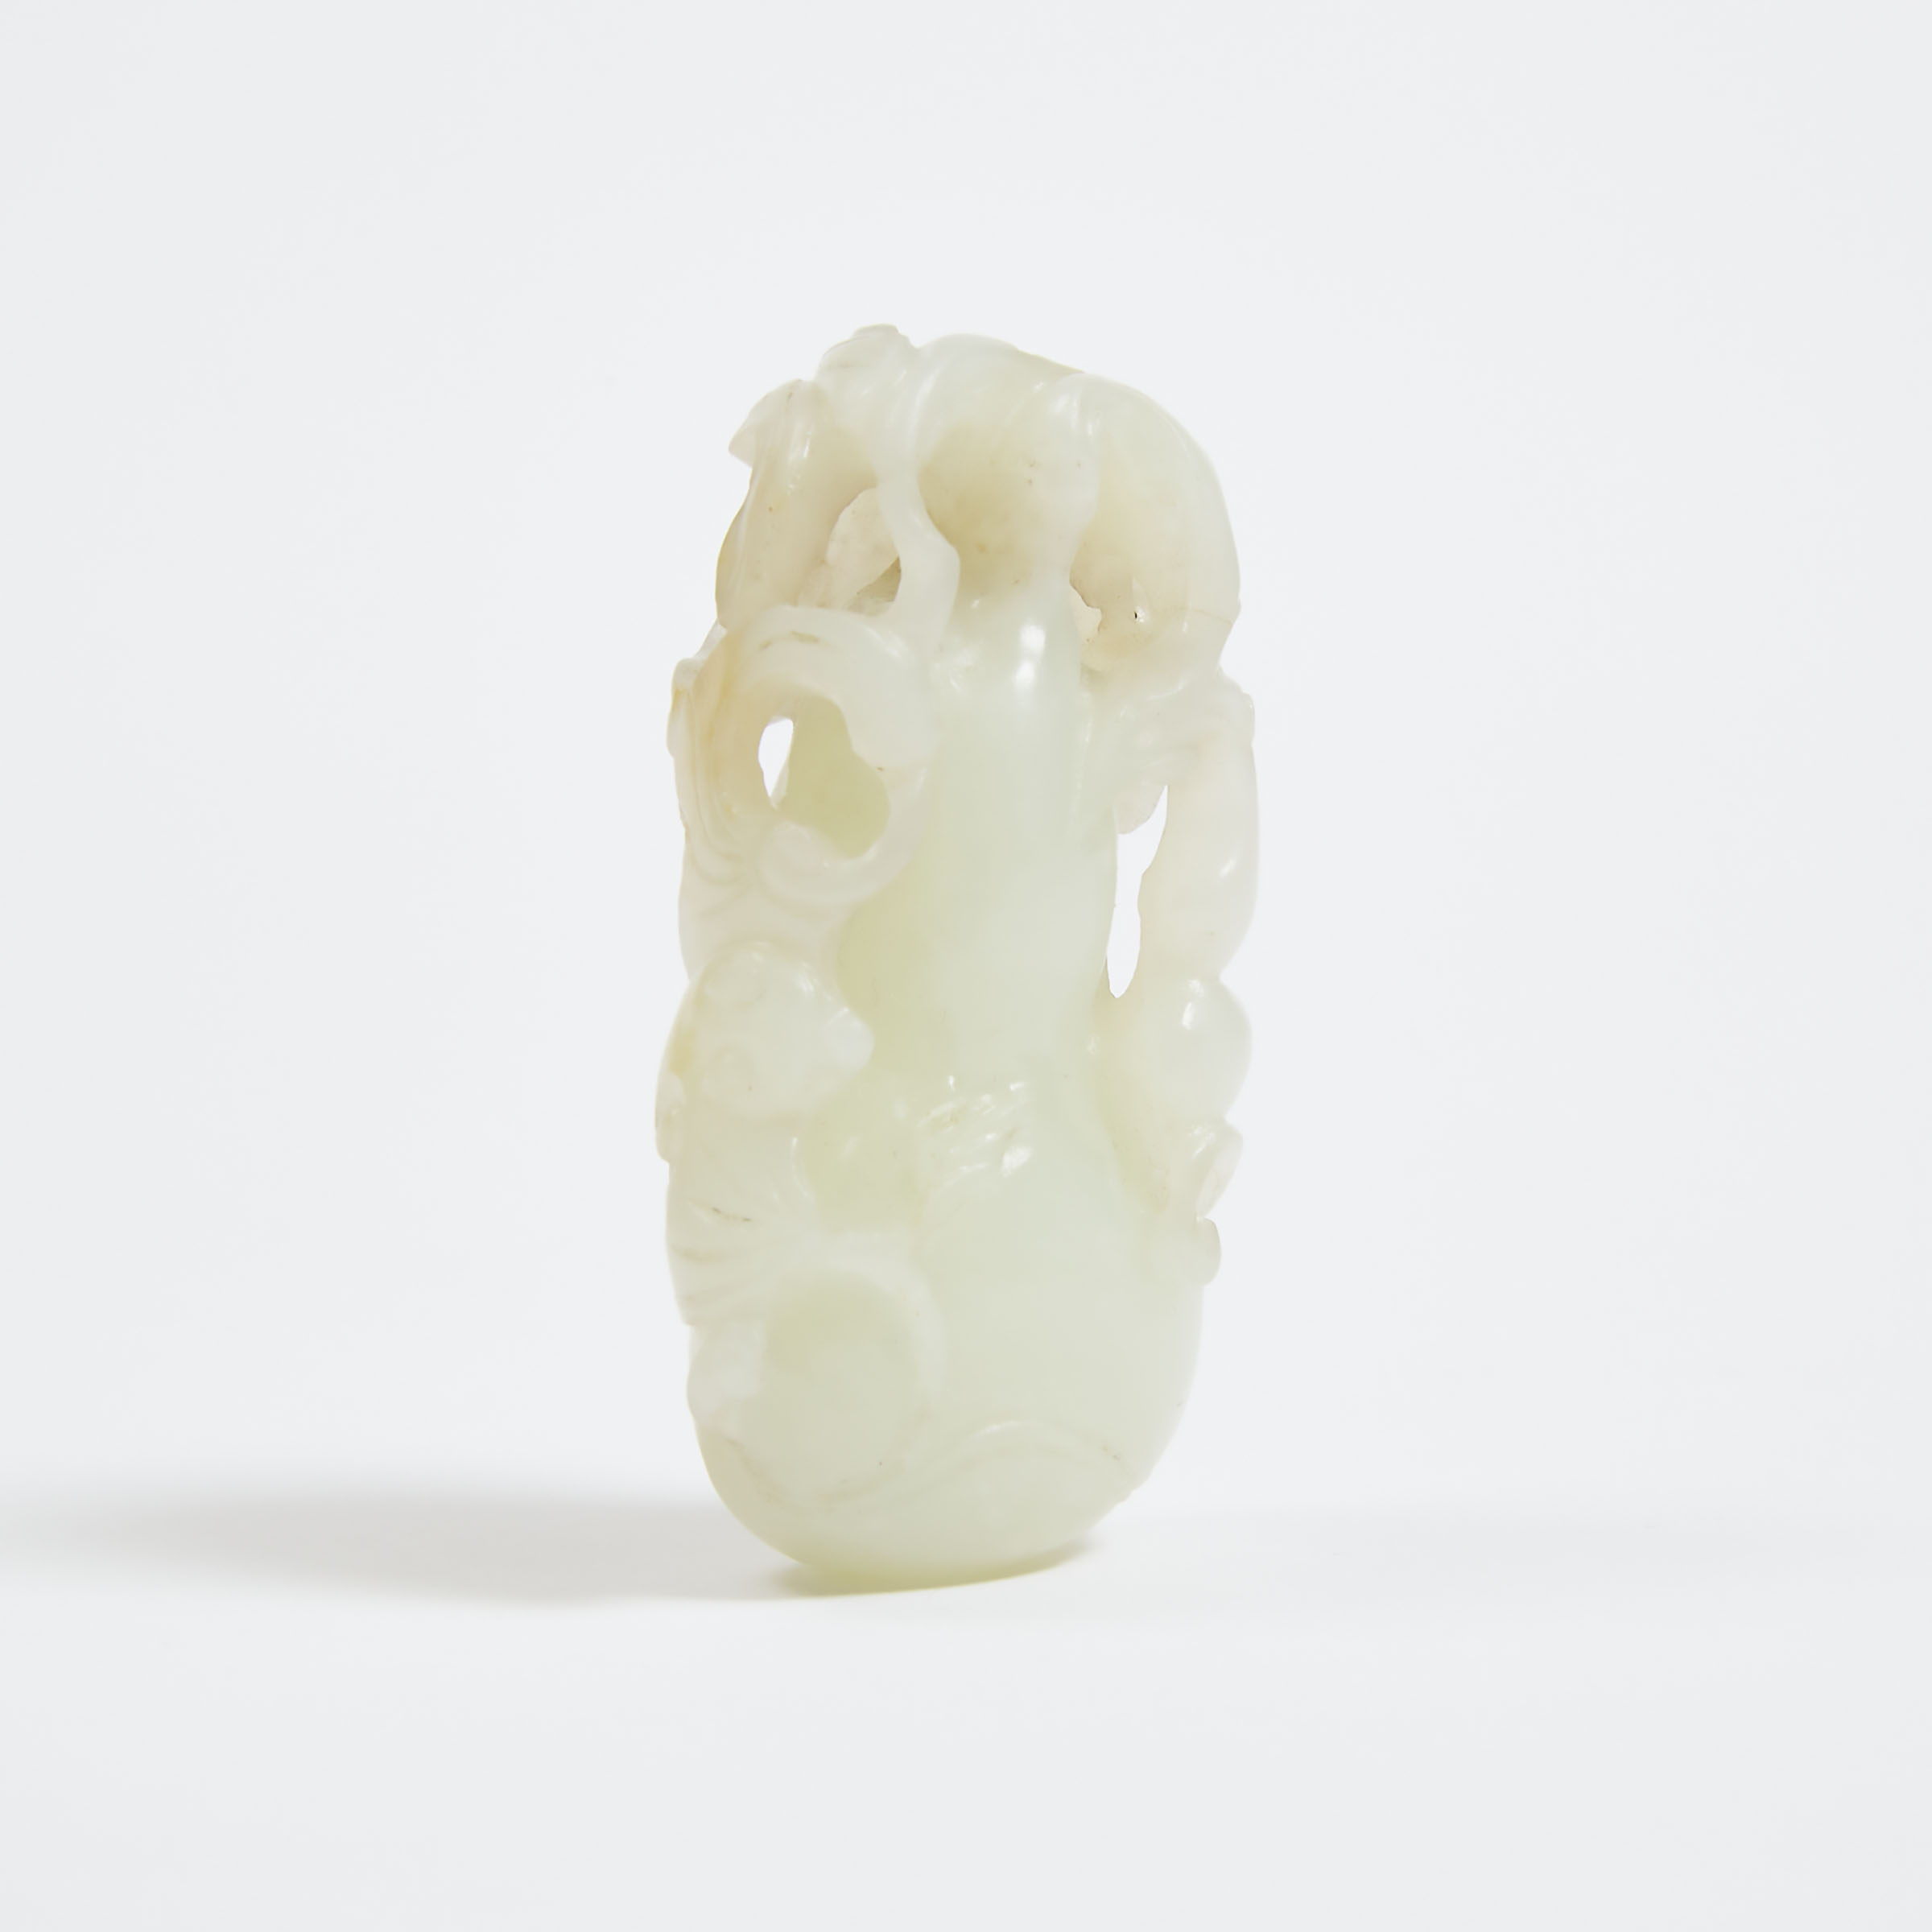 A White Jade 'Double-Gourd' Pendant, Qing Dynasty, 18th/19th Century